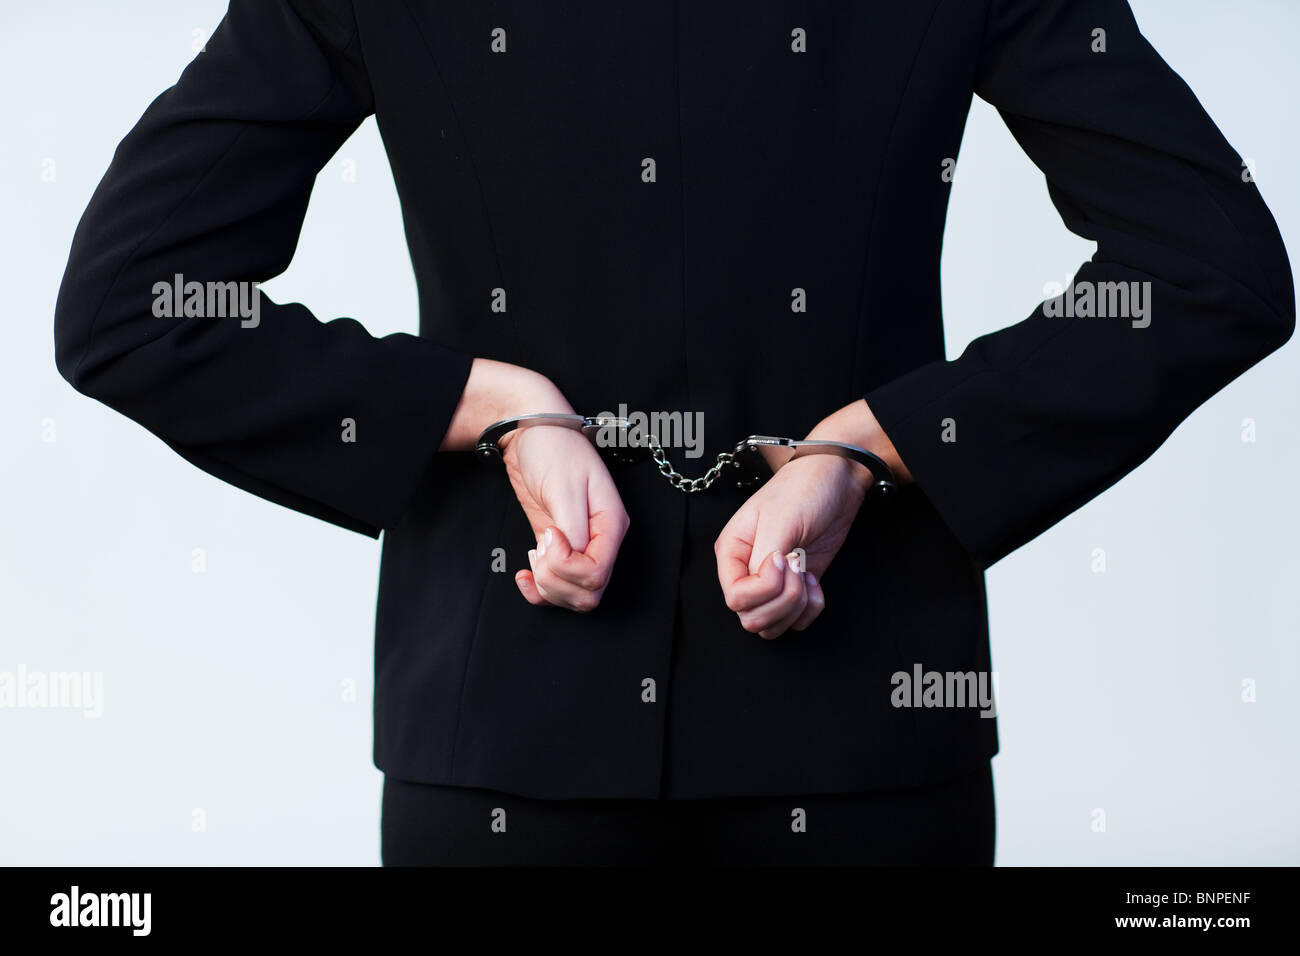 Business person handcuffed Stock Photo